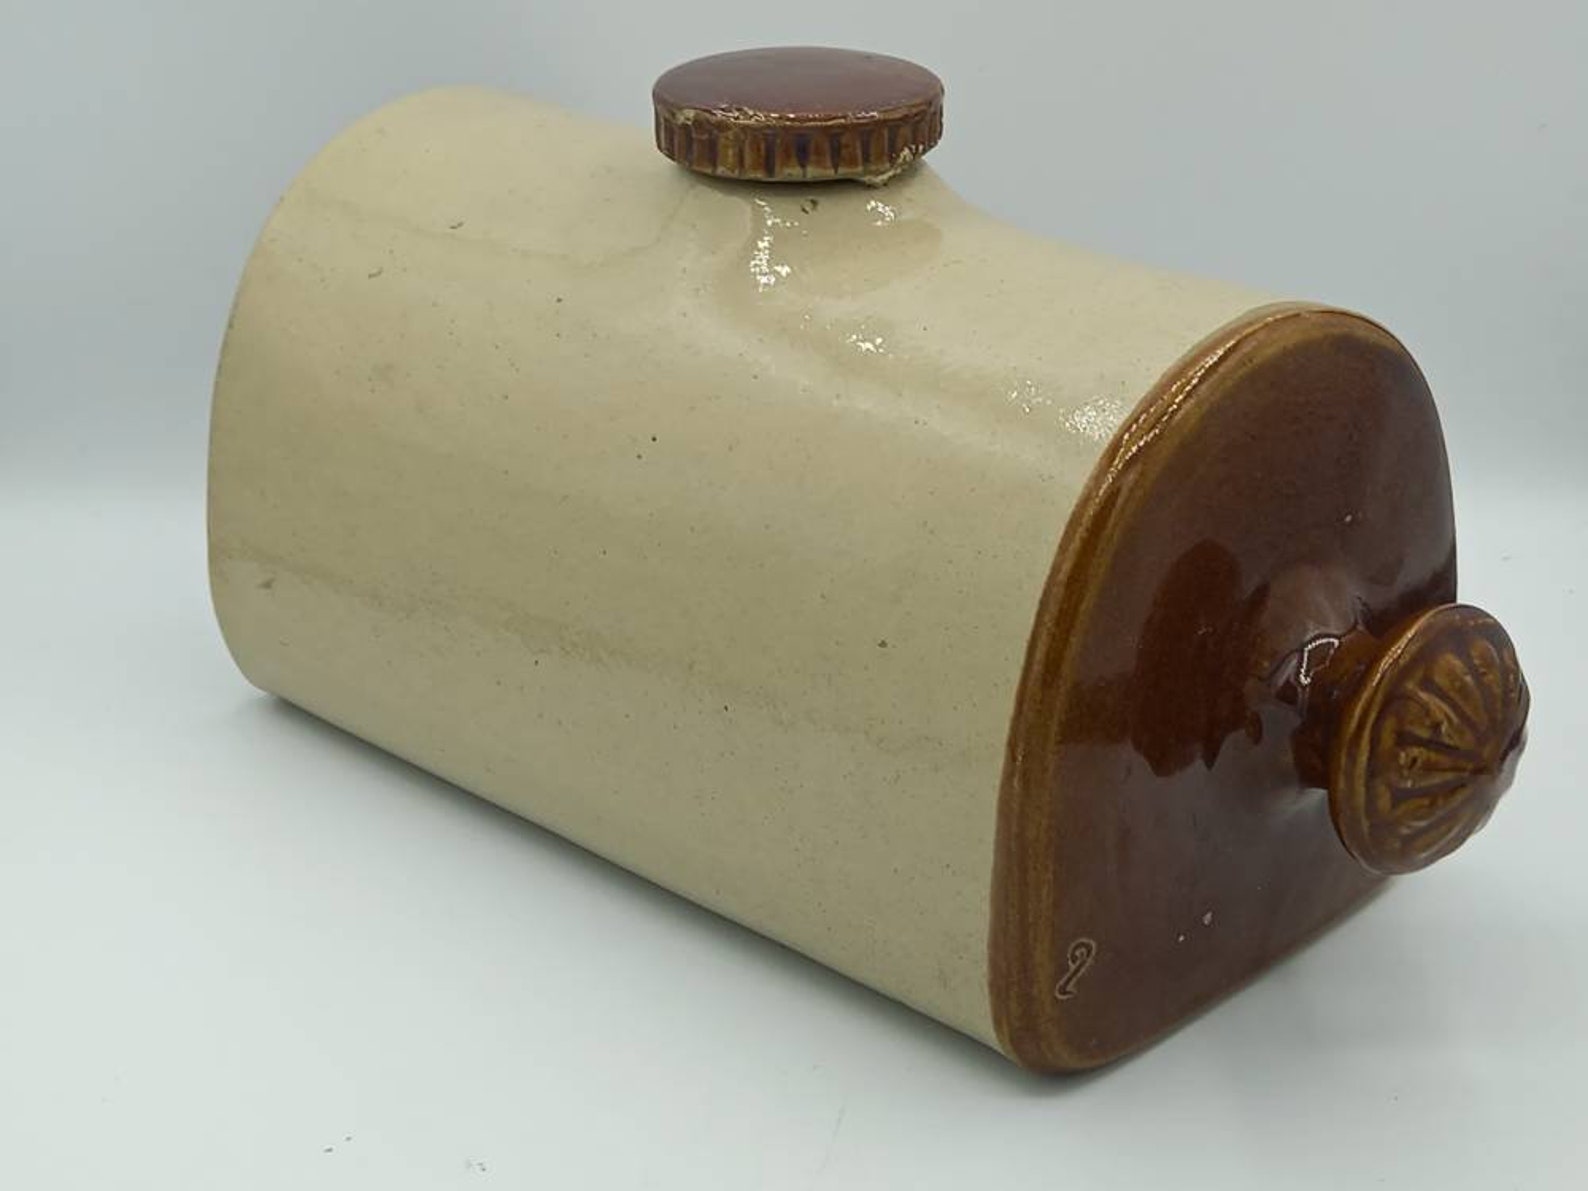 victorian-hot-water-bottle-commonly-used-as-a-doorstop-etsy